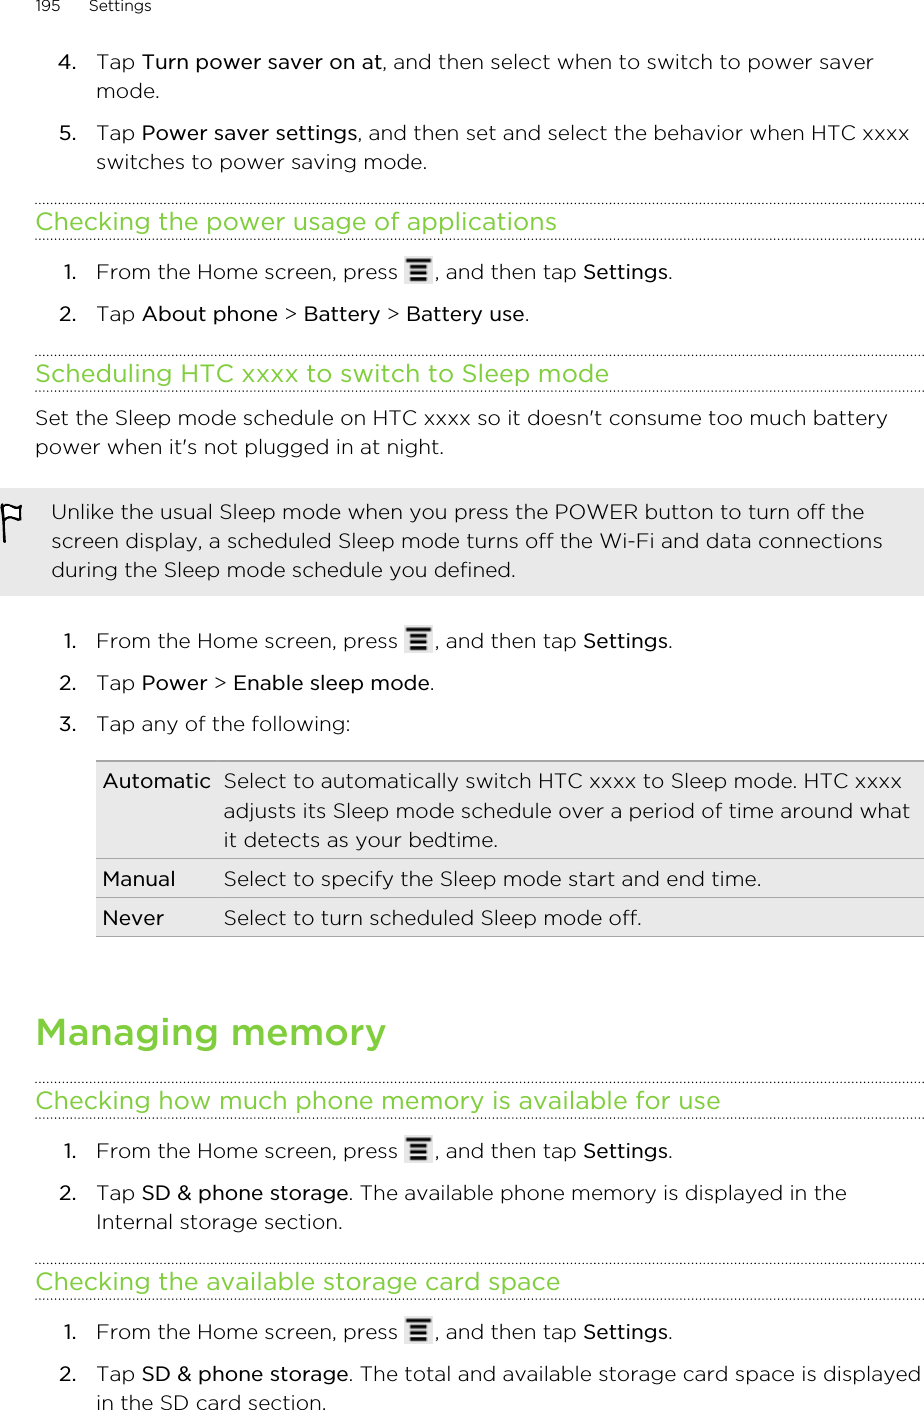 4. Tap Turn power saver on at, and then select when to switch to power savermode.5. Tap Power saver settings, and then set and select the behavior when HTC xxxxswitches to power saving mode.Checking the power usage of applications1. From the Home screen, press  , and then tap Settings.2. Tap About phone &gt; Battery &gt; Battery use.Scheduling HTC xxxx to switch to Sleep modeSet the Sleep mode schedule on HTC xxxx so it doesn&apos;t consume too much batterypower when it&apos;s not plugged in at night.Unlike the usual Sleep mode when you press the POWER button to turn off thescreen display, a scheduled Sleep mode turns off the Wi-Fi and data connectionsduring the Sleep mode schedule you defined.1. From the Home screen, press  , and then tap Settings.2. Tap Power &gt; Enable sleep mode.3. Tap any of the following:Automatic Select to automatically switch HTC xxxx to Sleep mode. HTC xxxxadjusts its Sleep mode schedule over a period of time around whatit detects as your bedtime.Manual Select to specify the Sleep mode start and end time.Never Select to turn scheduled Sleep mode off.Managing memoryChecking how much phone memory is available for use1. From the Home screen, press  , and then tap Settings.2. Tap SD &amp; phone storage. The available phone memory is displayed in theInternal storage section.Checking the available storage card space1. From the Home screen, press  , and then tap Settings.2. Tap SD &amp; phone storage. The total and available storage card space is displayedin the SD card section.195 Settings